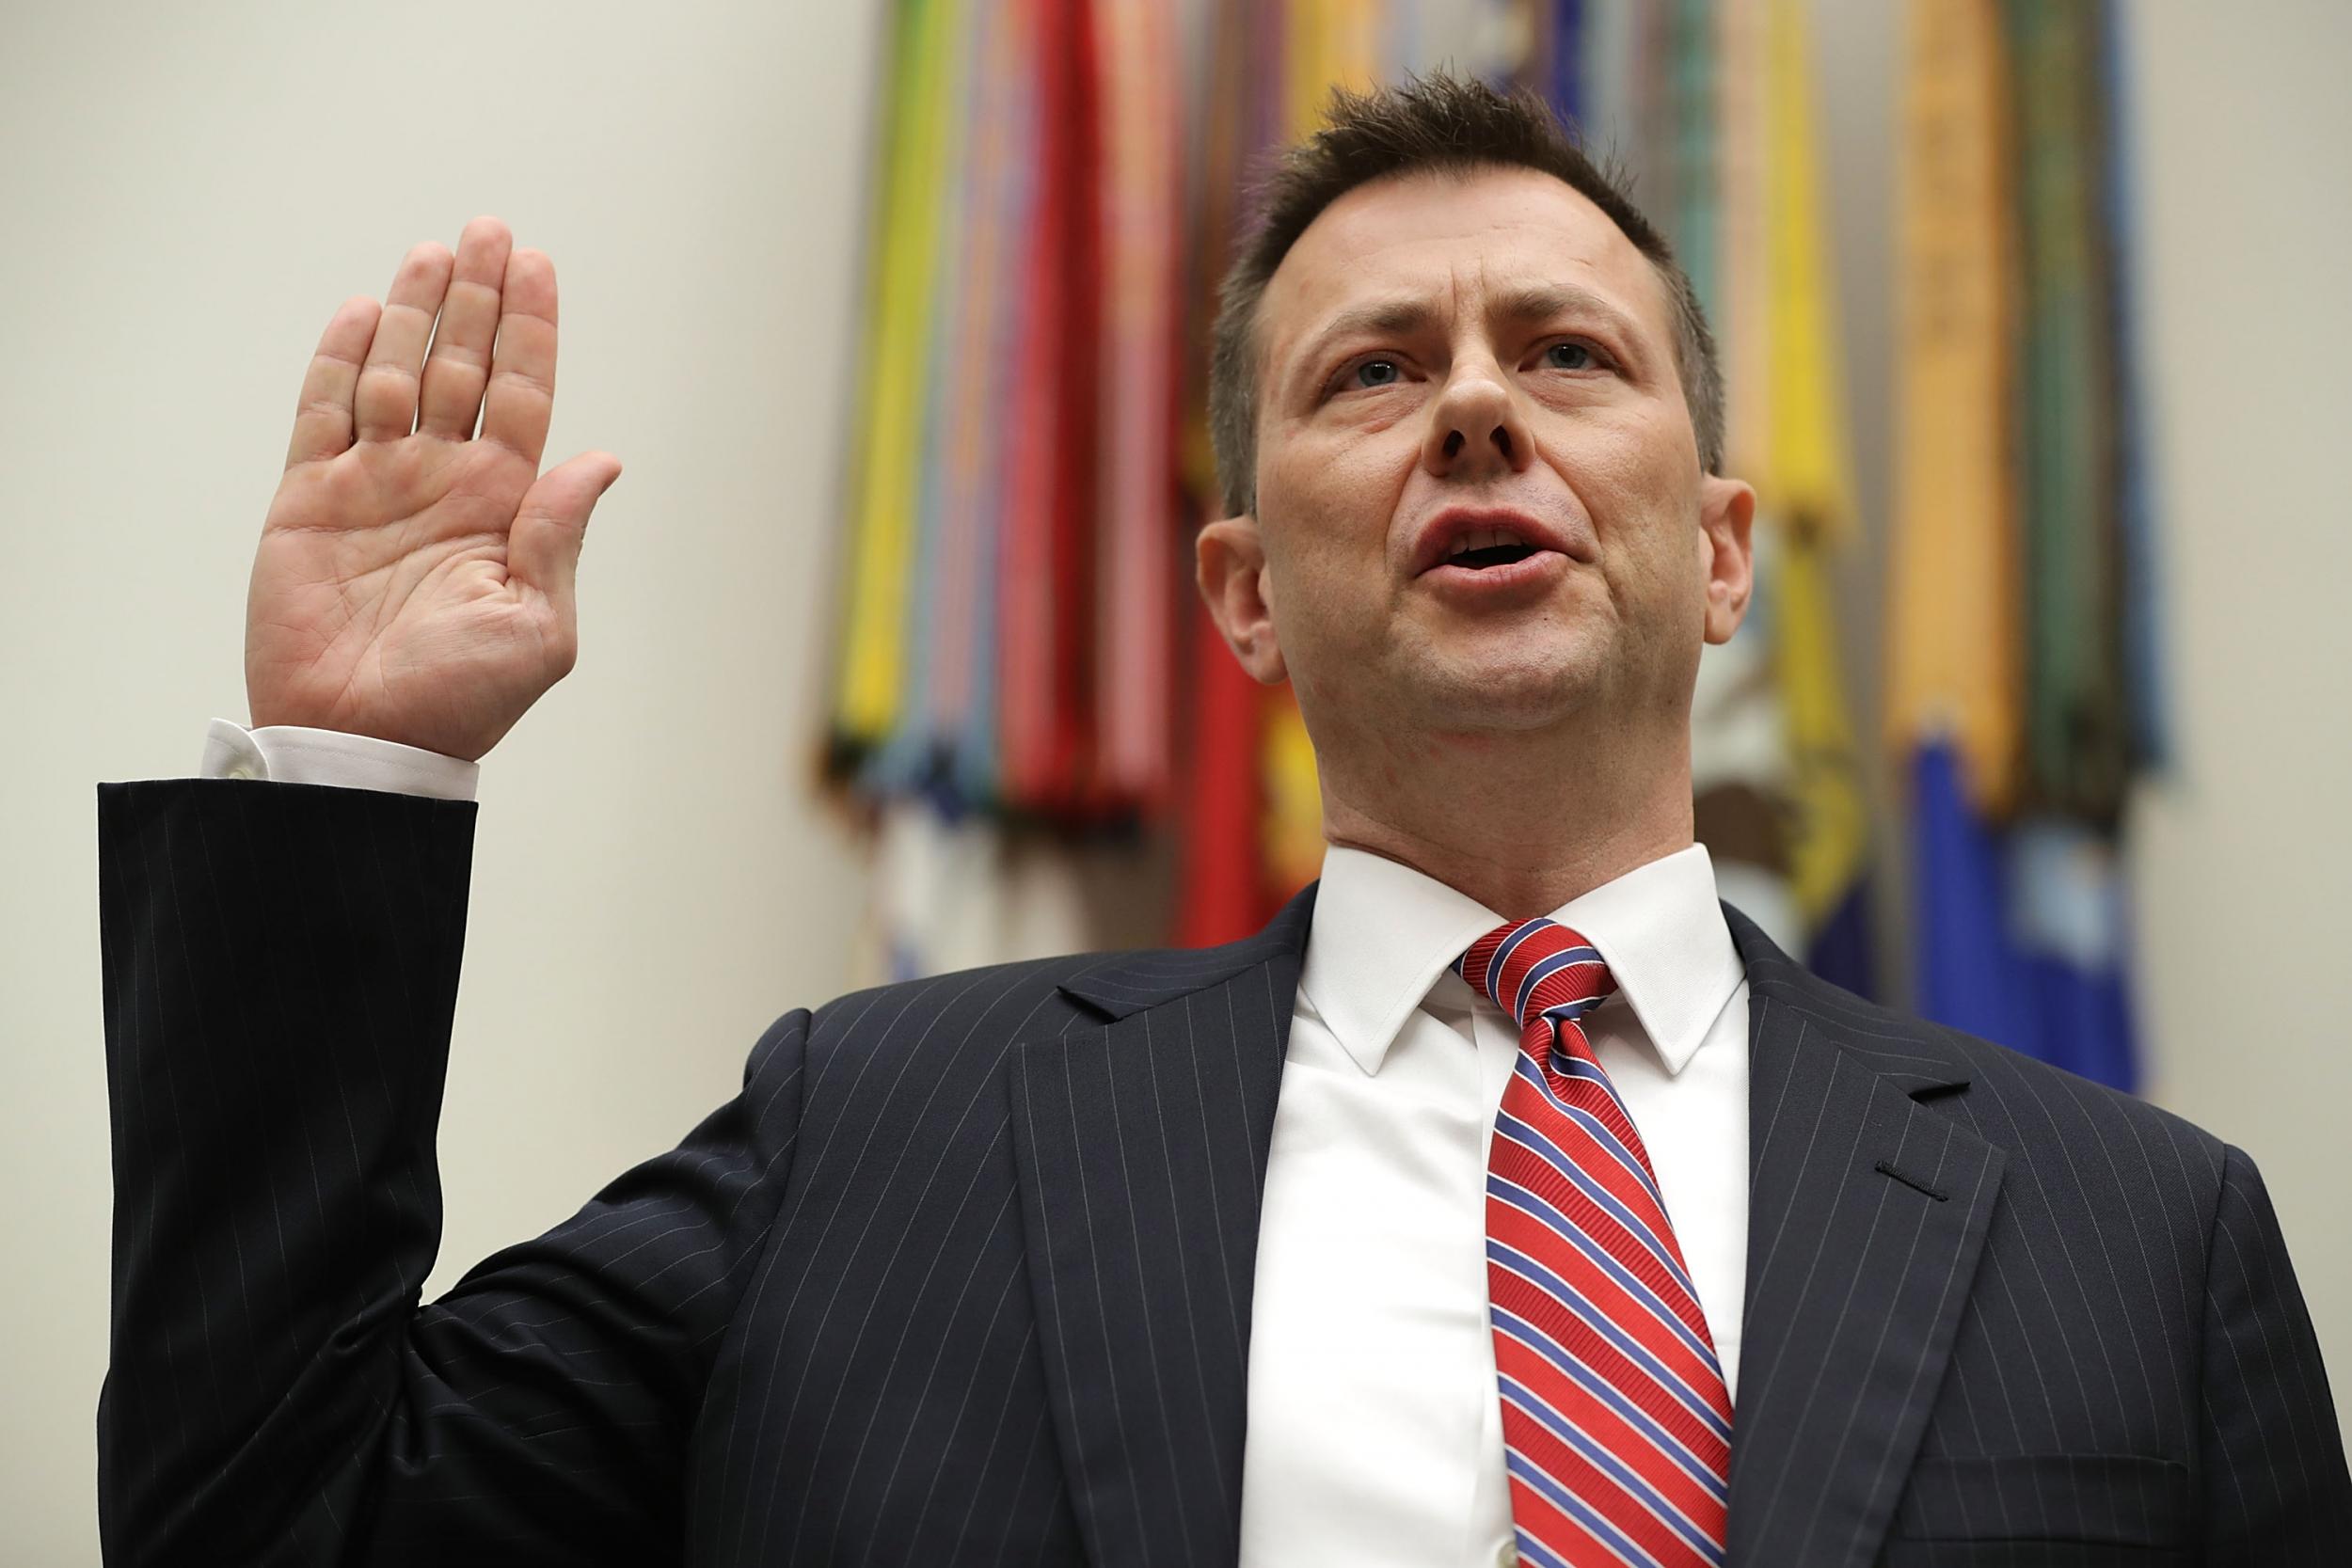 Deputy Assistant FBI Director Peter Strzok is sworn in before a joint committee hearing of the House Judiciary and Oversight and Government Reform committees